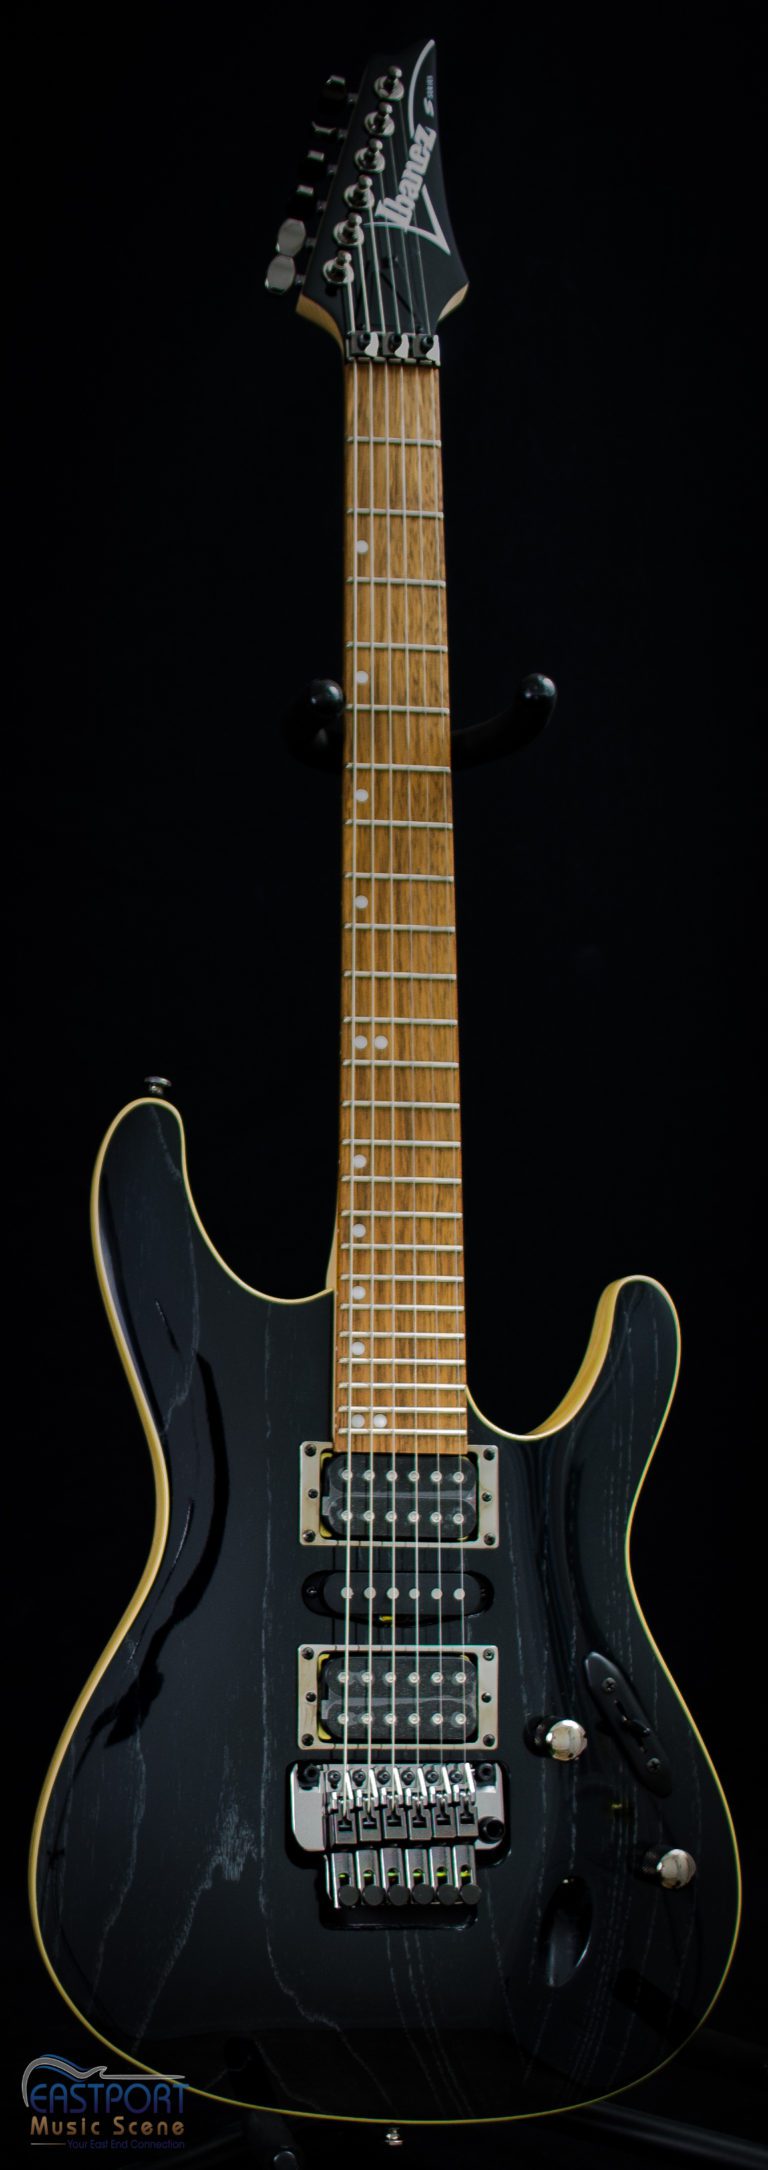 A black electric guitar with a yellow stripe on the neck.